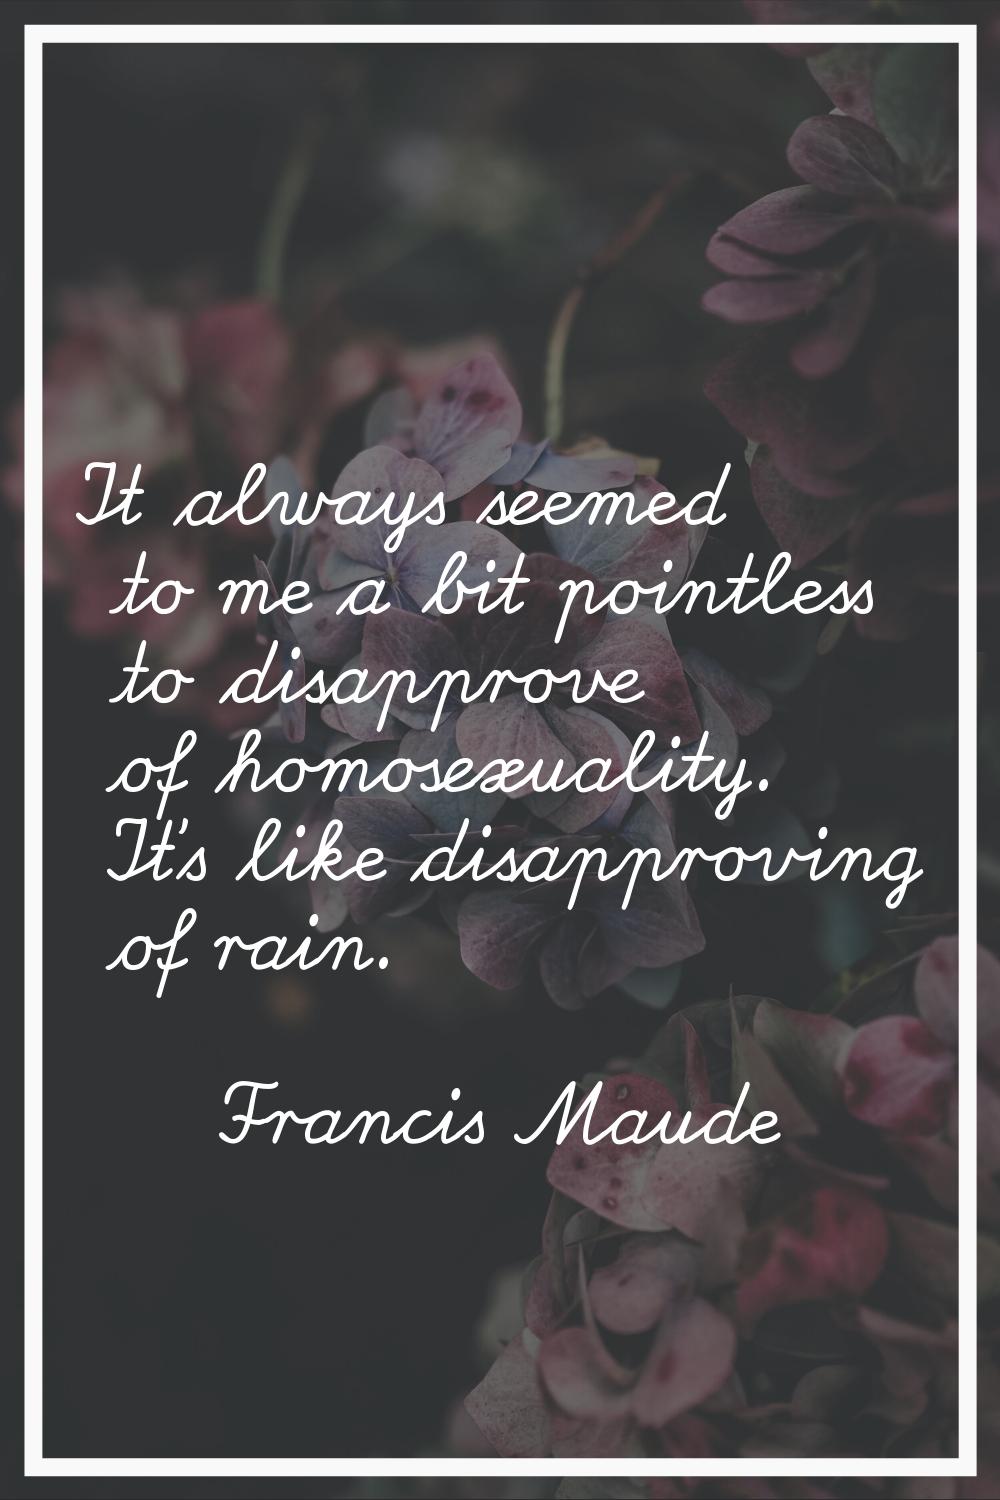 It always seemed to me a bit pointless to disapprove of homosexuality. It's like disapproving of ra